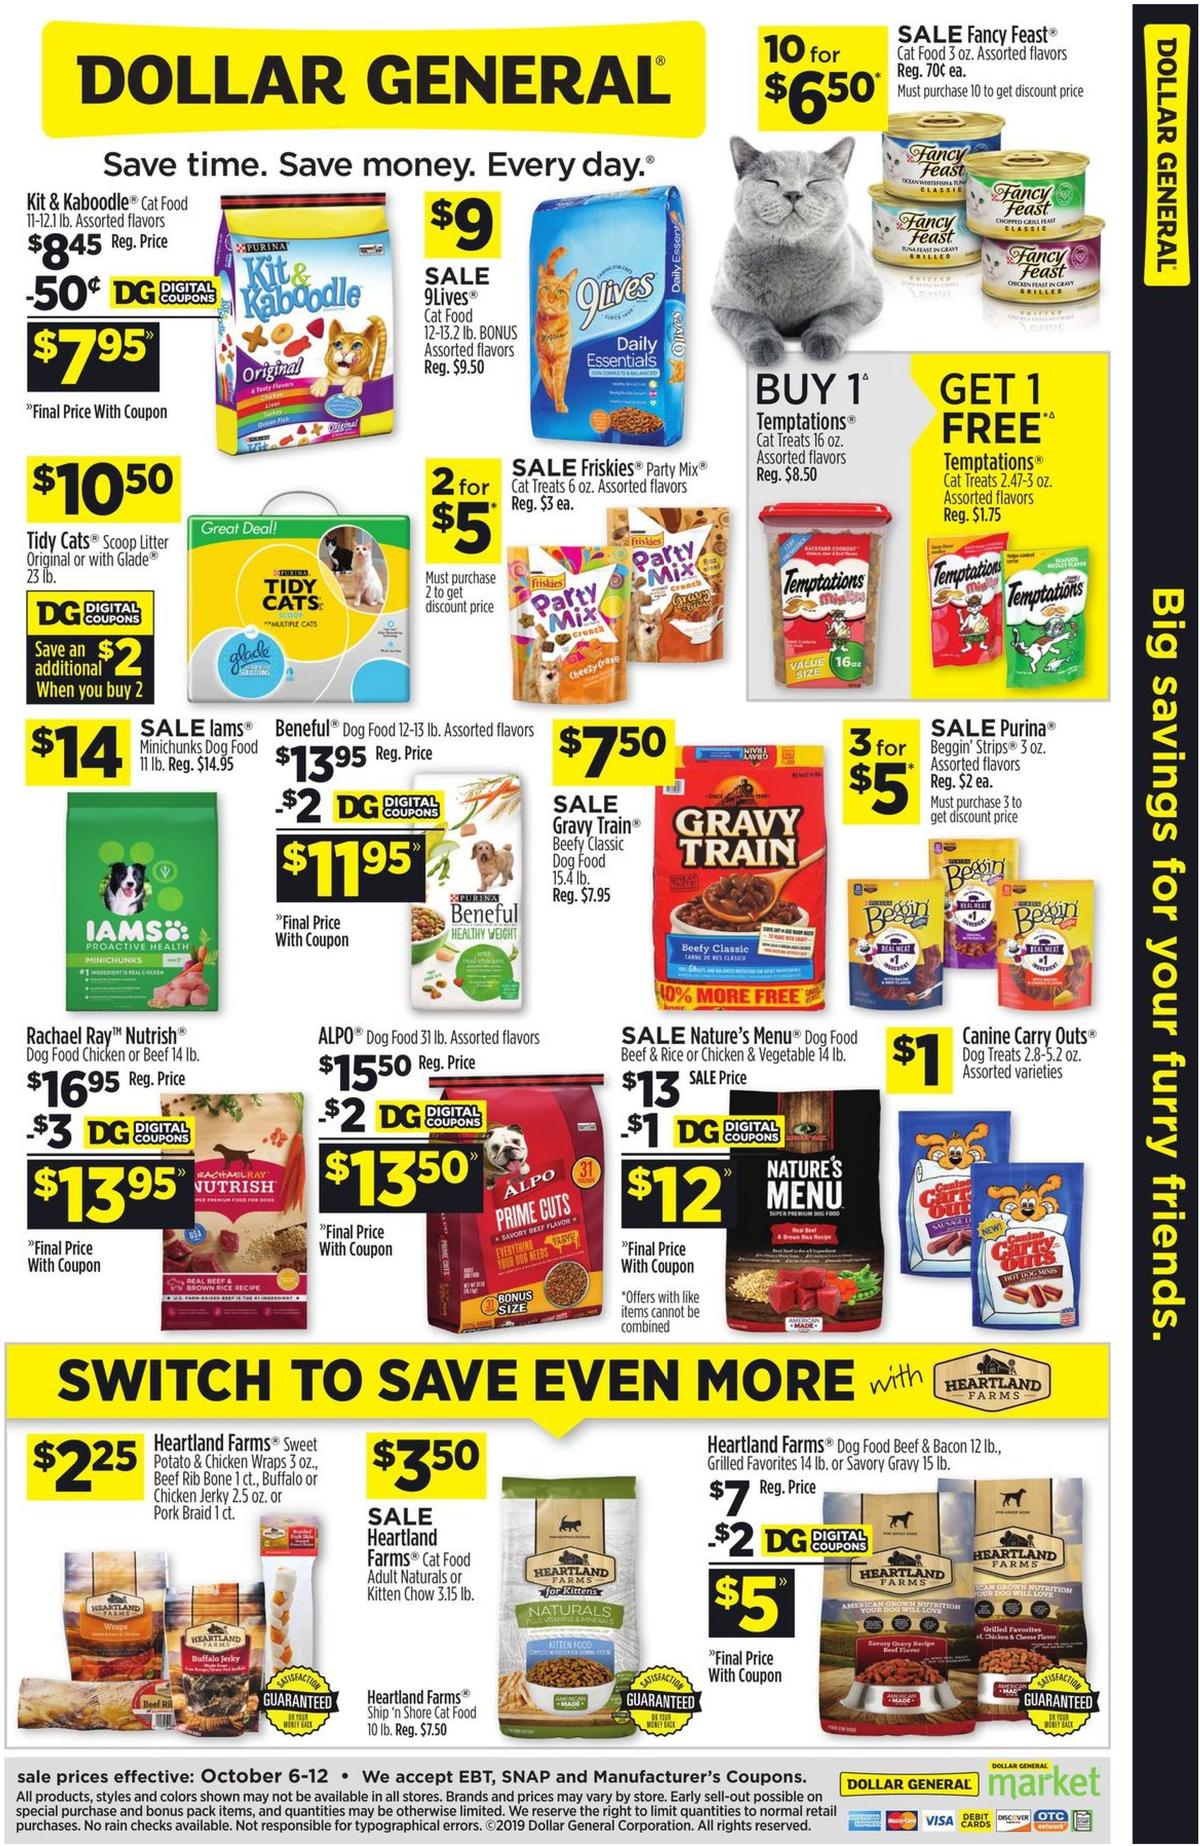 Dollar General Save More on Pet Essentials Weekly Ad from October 6